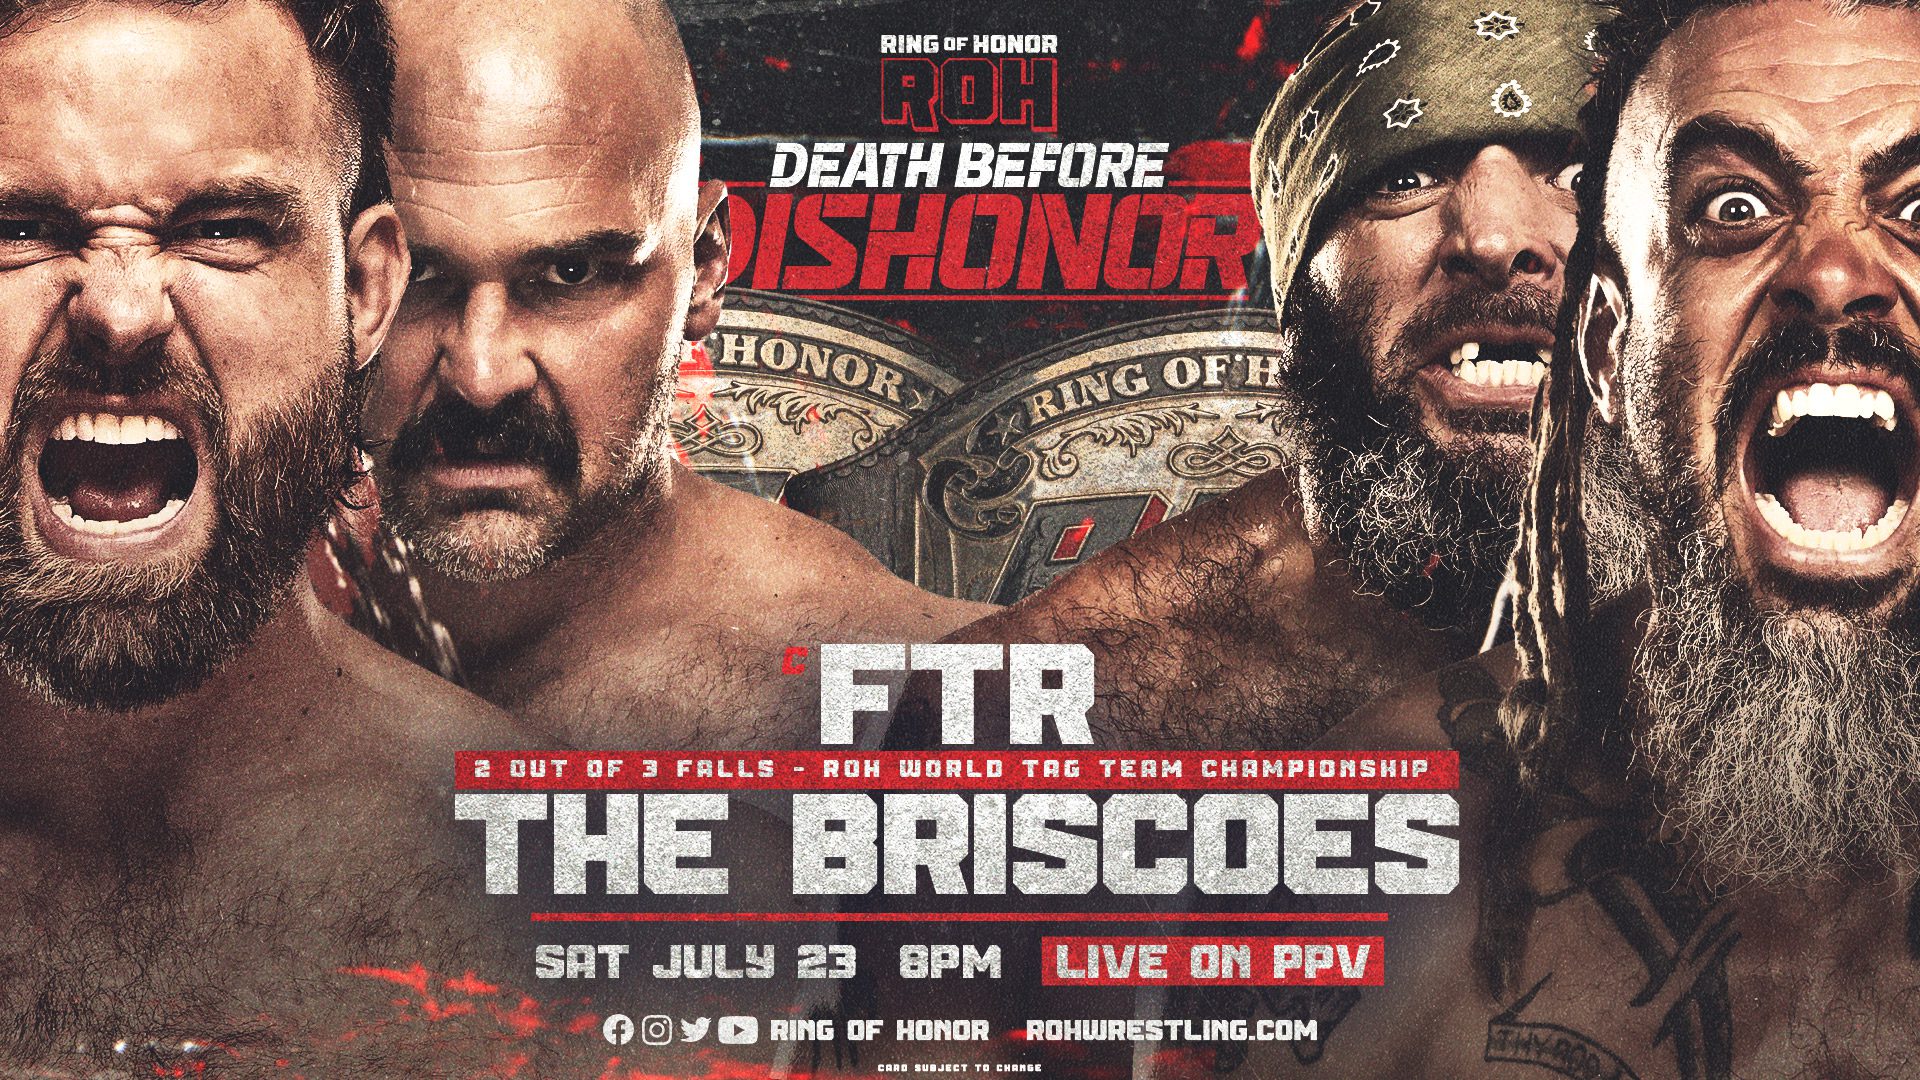 ROH Death Before Dishonor Results: FTR vs. The Briscoes